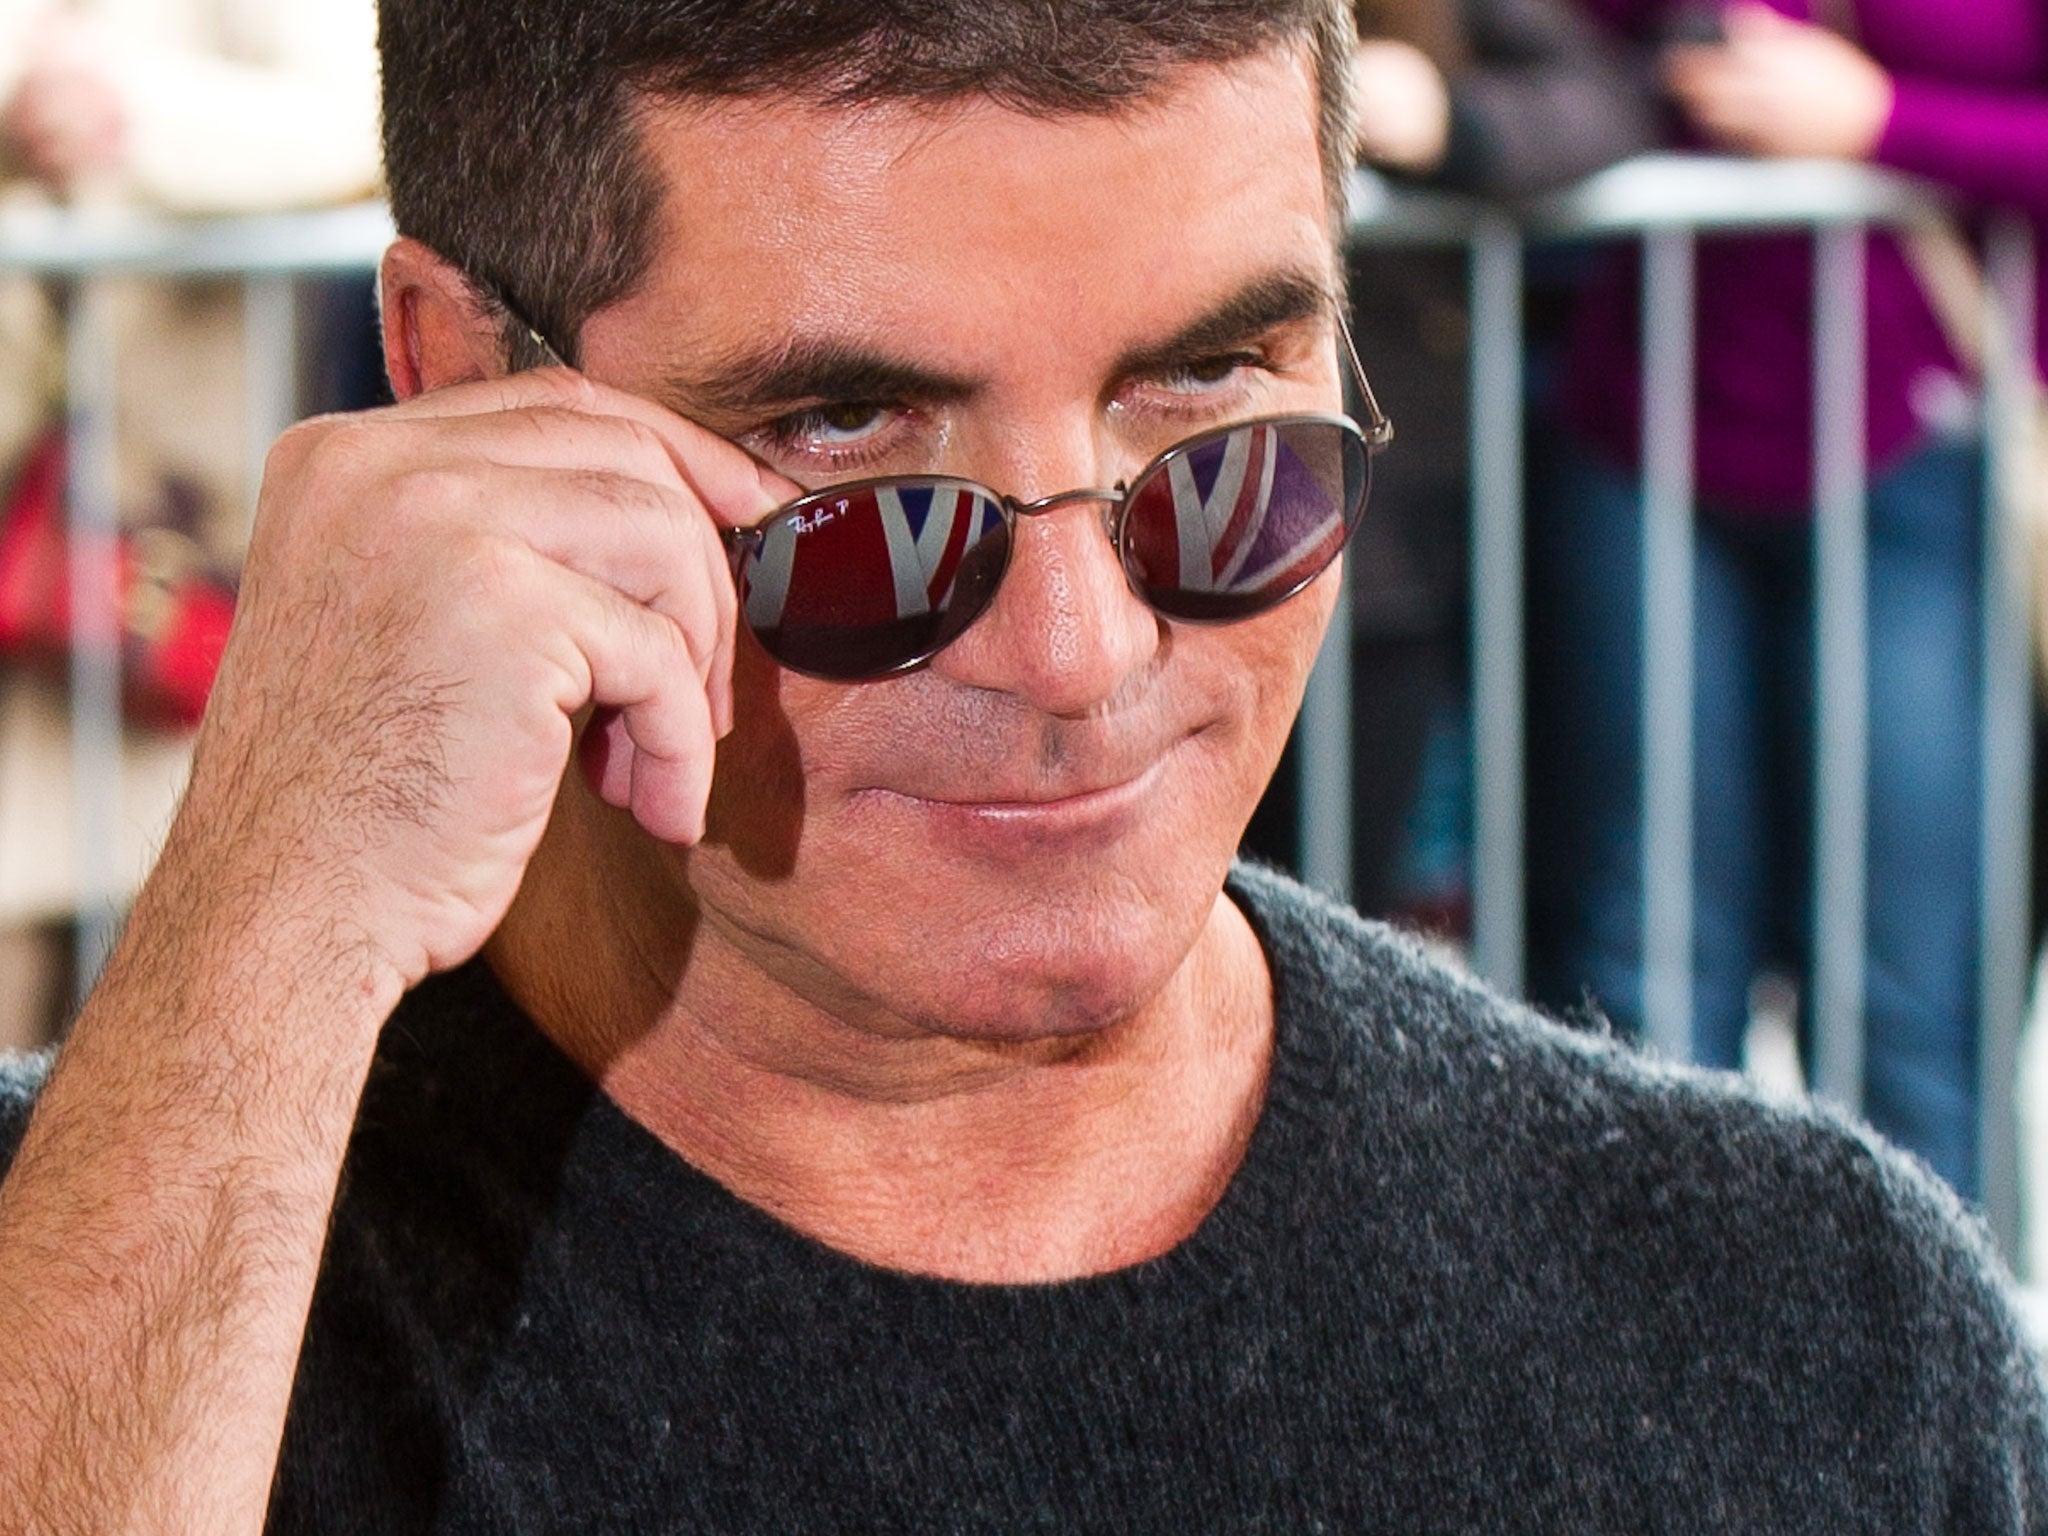 Simon Cowell will be back on the UK's X Factor judging panel this year, producers have confirmed